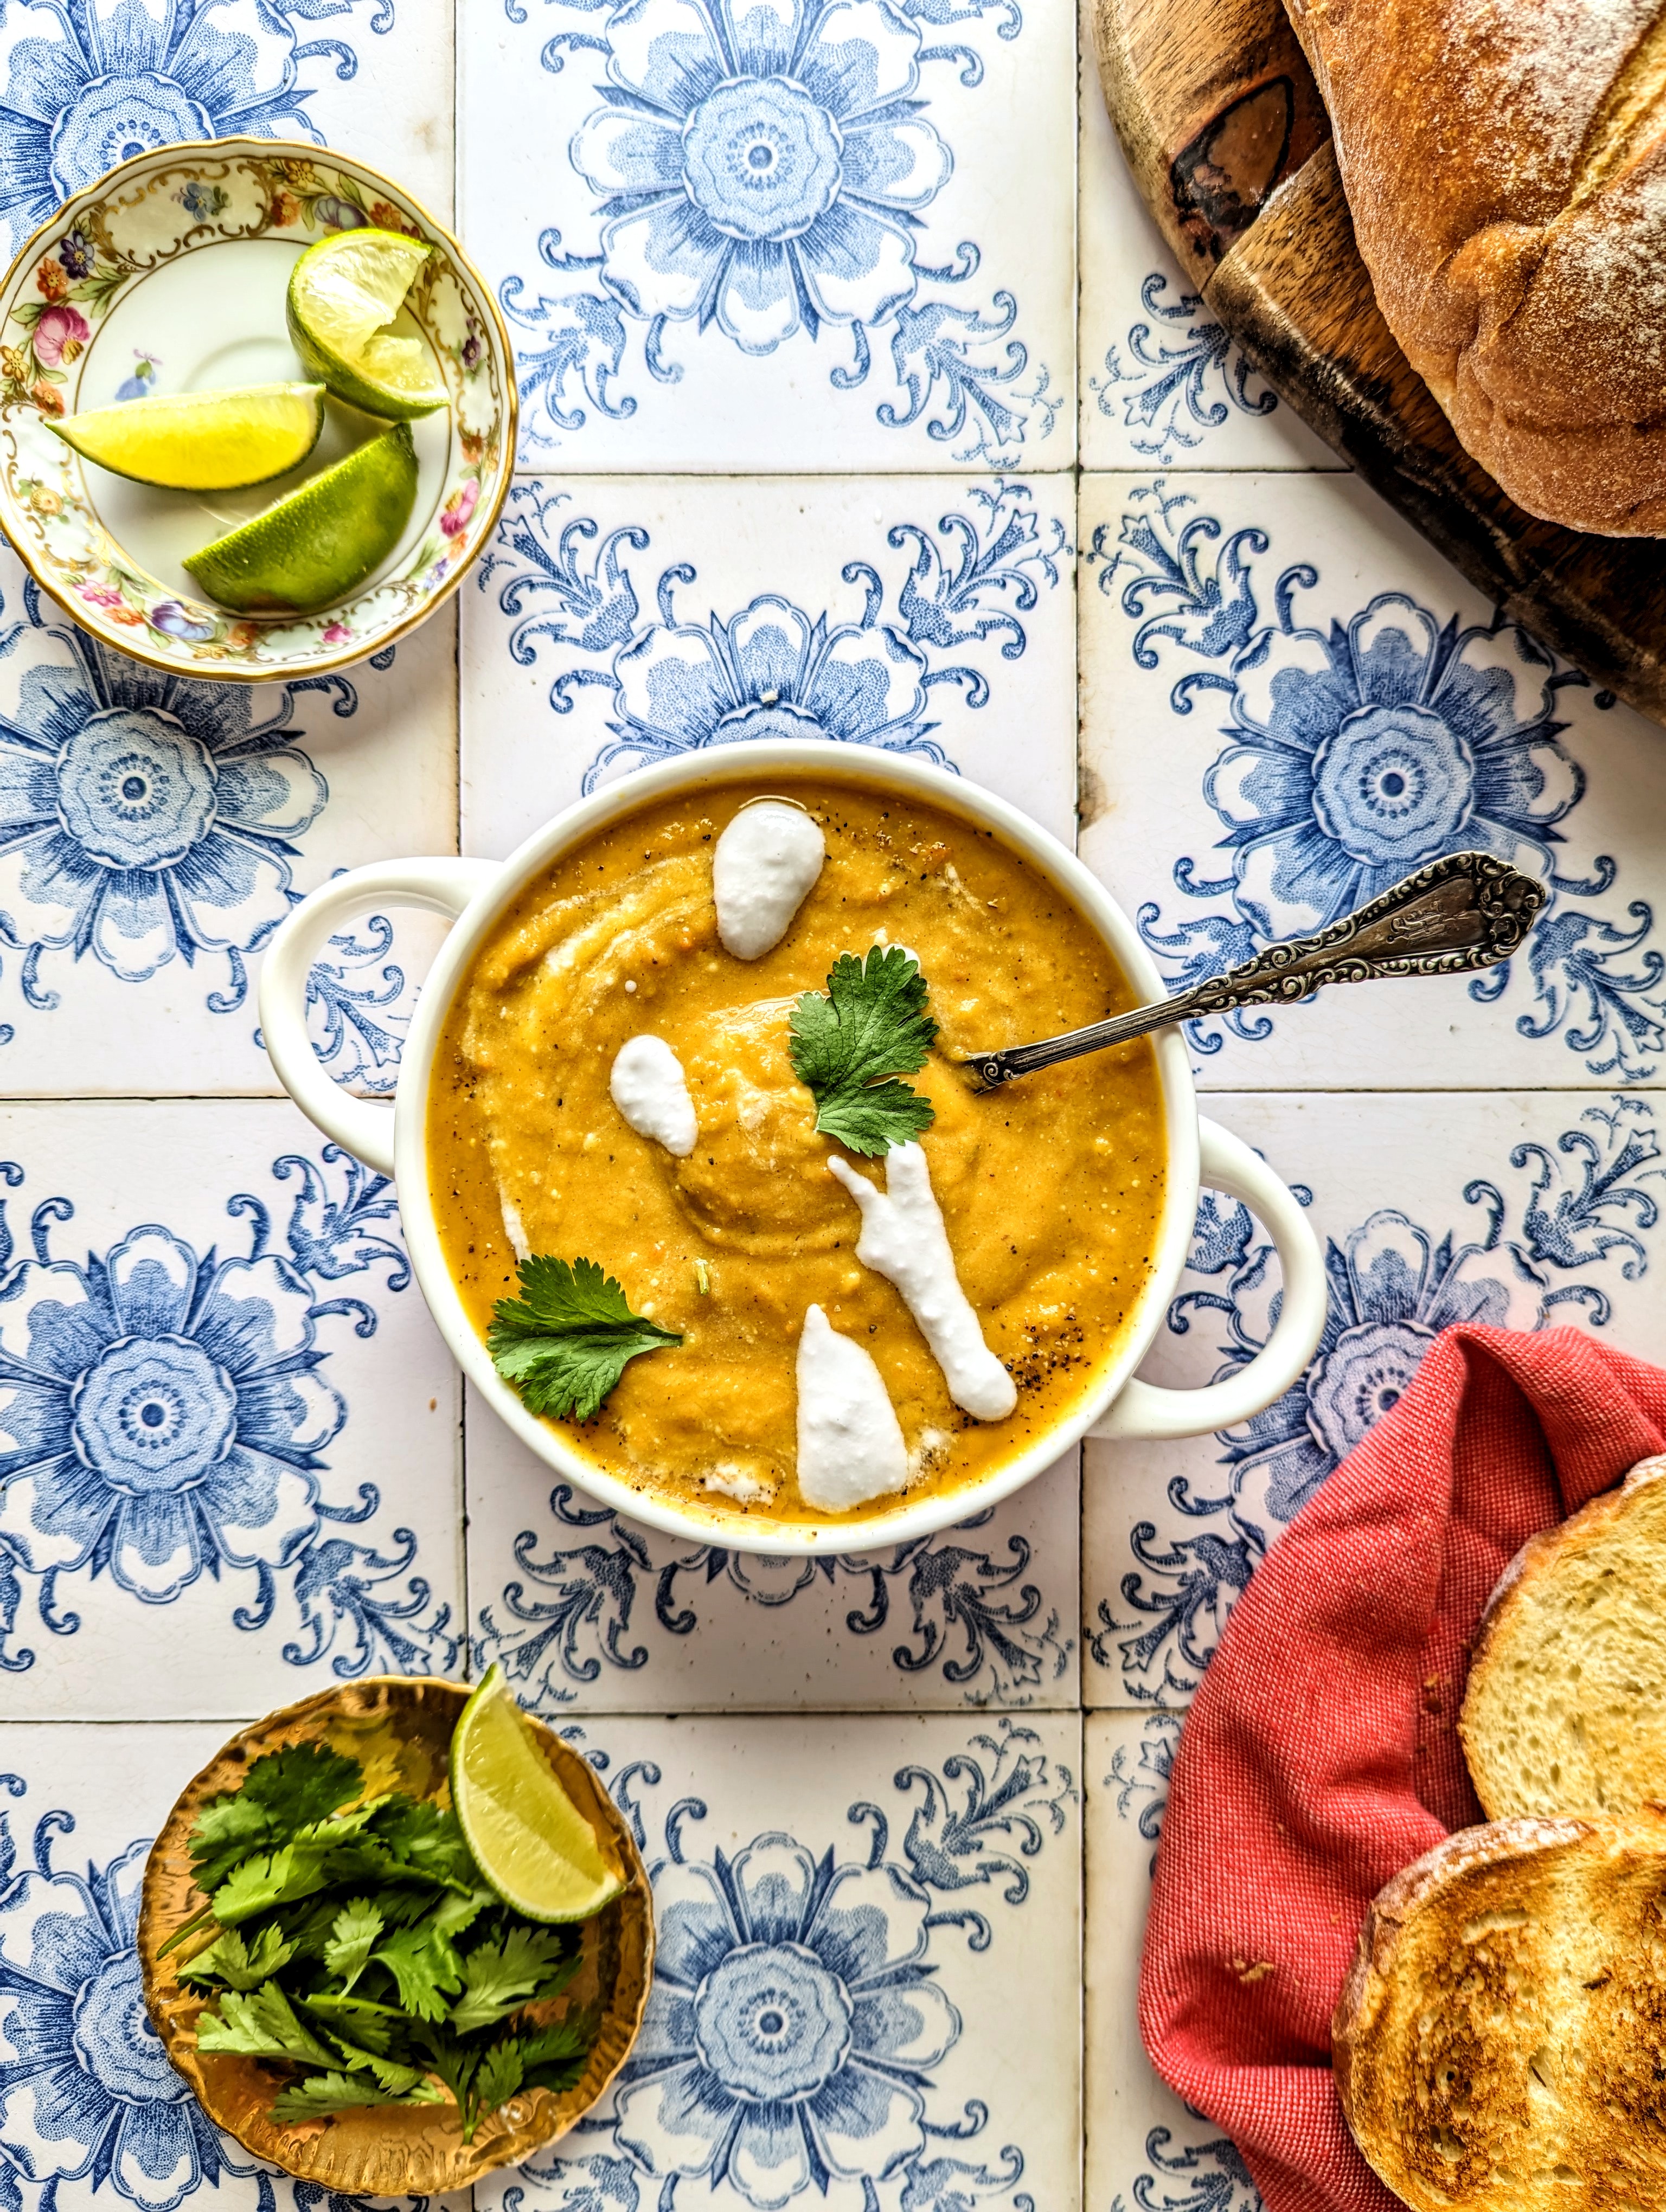 A spoon rests in a bowl of vibrant orange roasted squash and root vegetable soup. The soup is topped with white coconut cream and green cilantro.